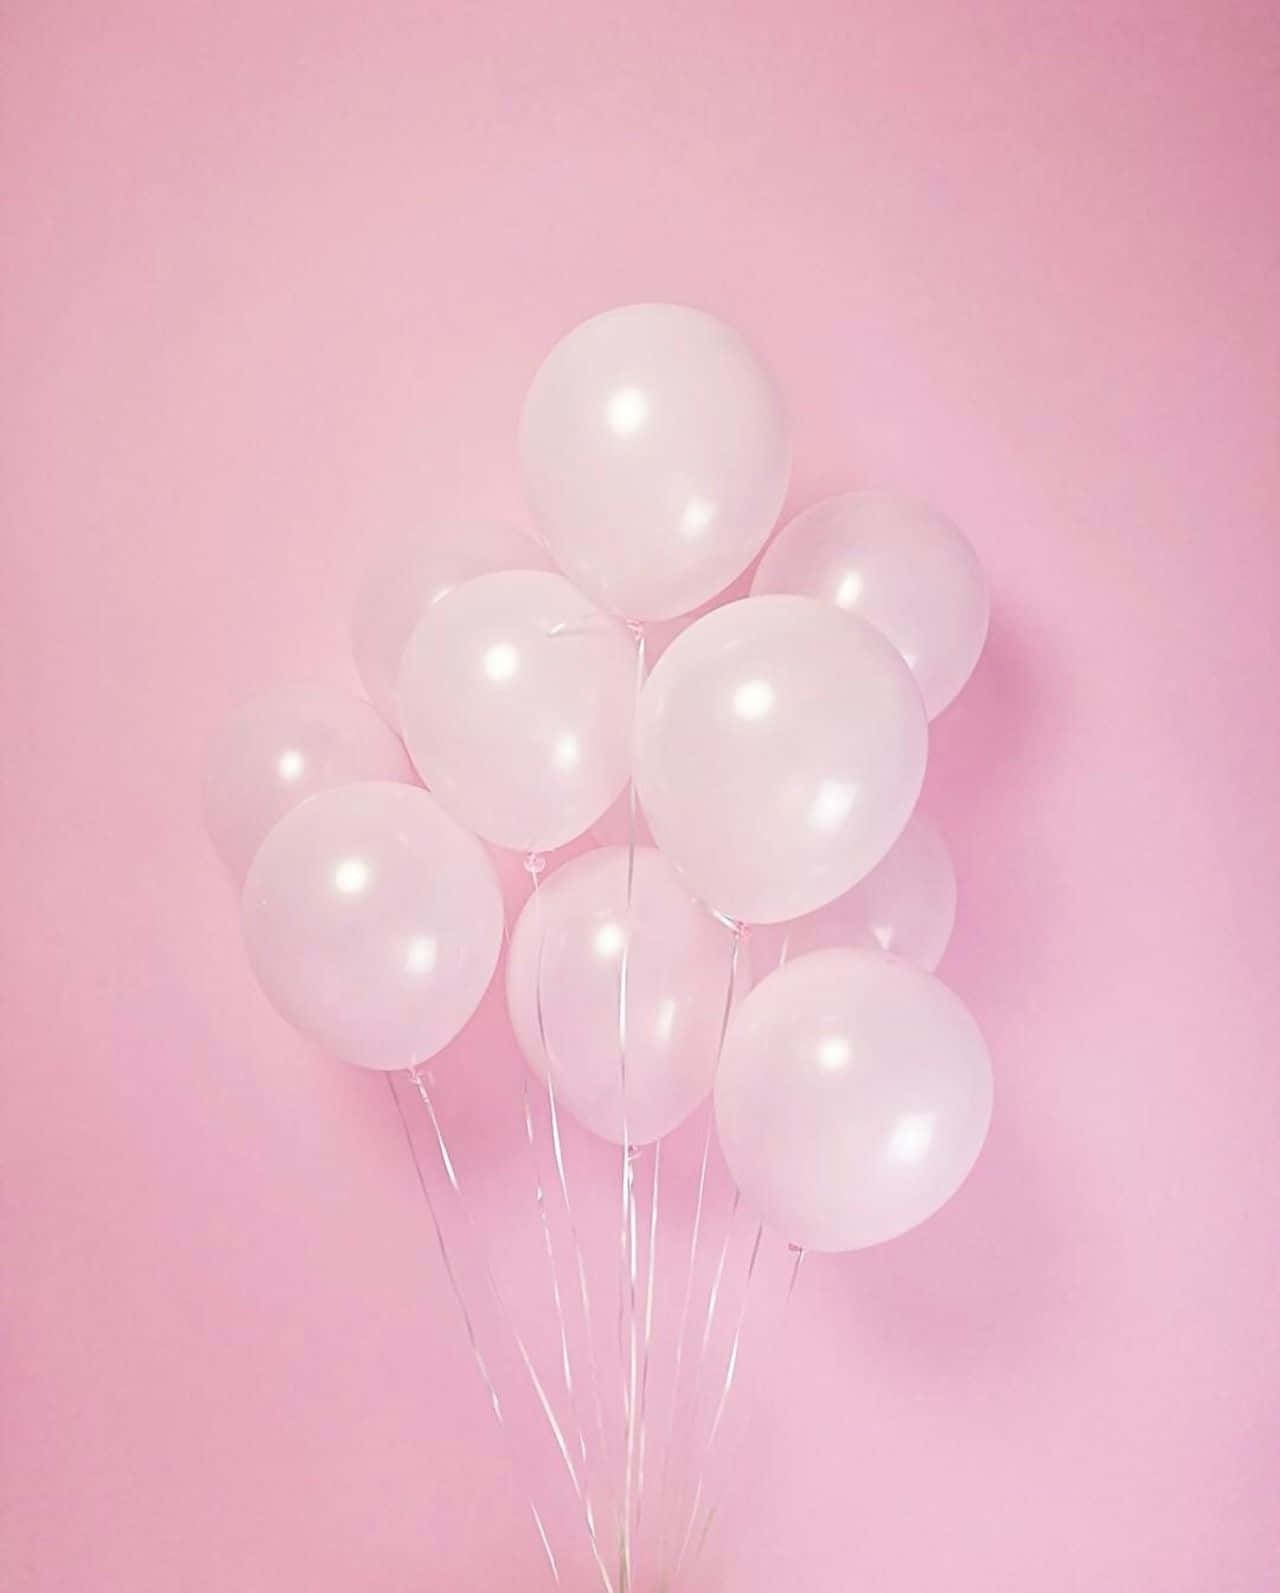 Brighten Up Your Day with Pink Balloons